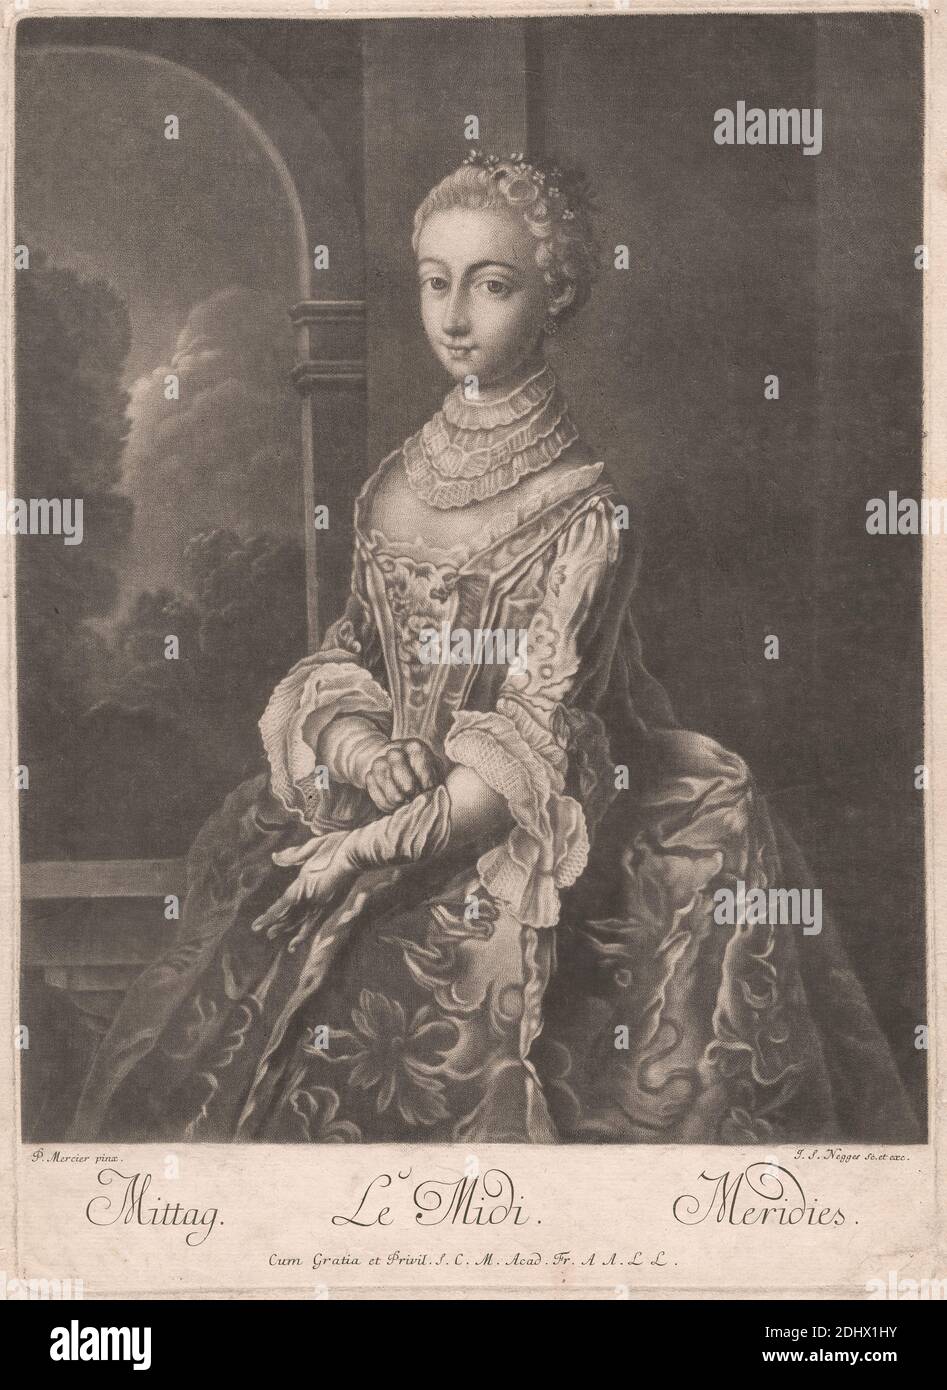 Mittag, Print made by Johann Simon Negges, 1726–1792, after Philippe Mercier, 1689 or 1691–1760, Franco-German, active in Britain (from 1716), undated, Mezzotint on moderately thick, moderately textured, cream laid paper, Sheet: 14 1/2 × 10 1/2 inches (36.8 × 26.7 cm), Plate: 13 13/16 × 9 15/16 inches (35.1 × 25.2 cm), and Image: 12 1/8 × 9 3/4 inches (30.8 × 24.8 cm), arch, costume, dress, figure study, genre subject, gloves Stock Photo